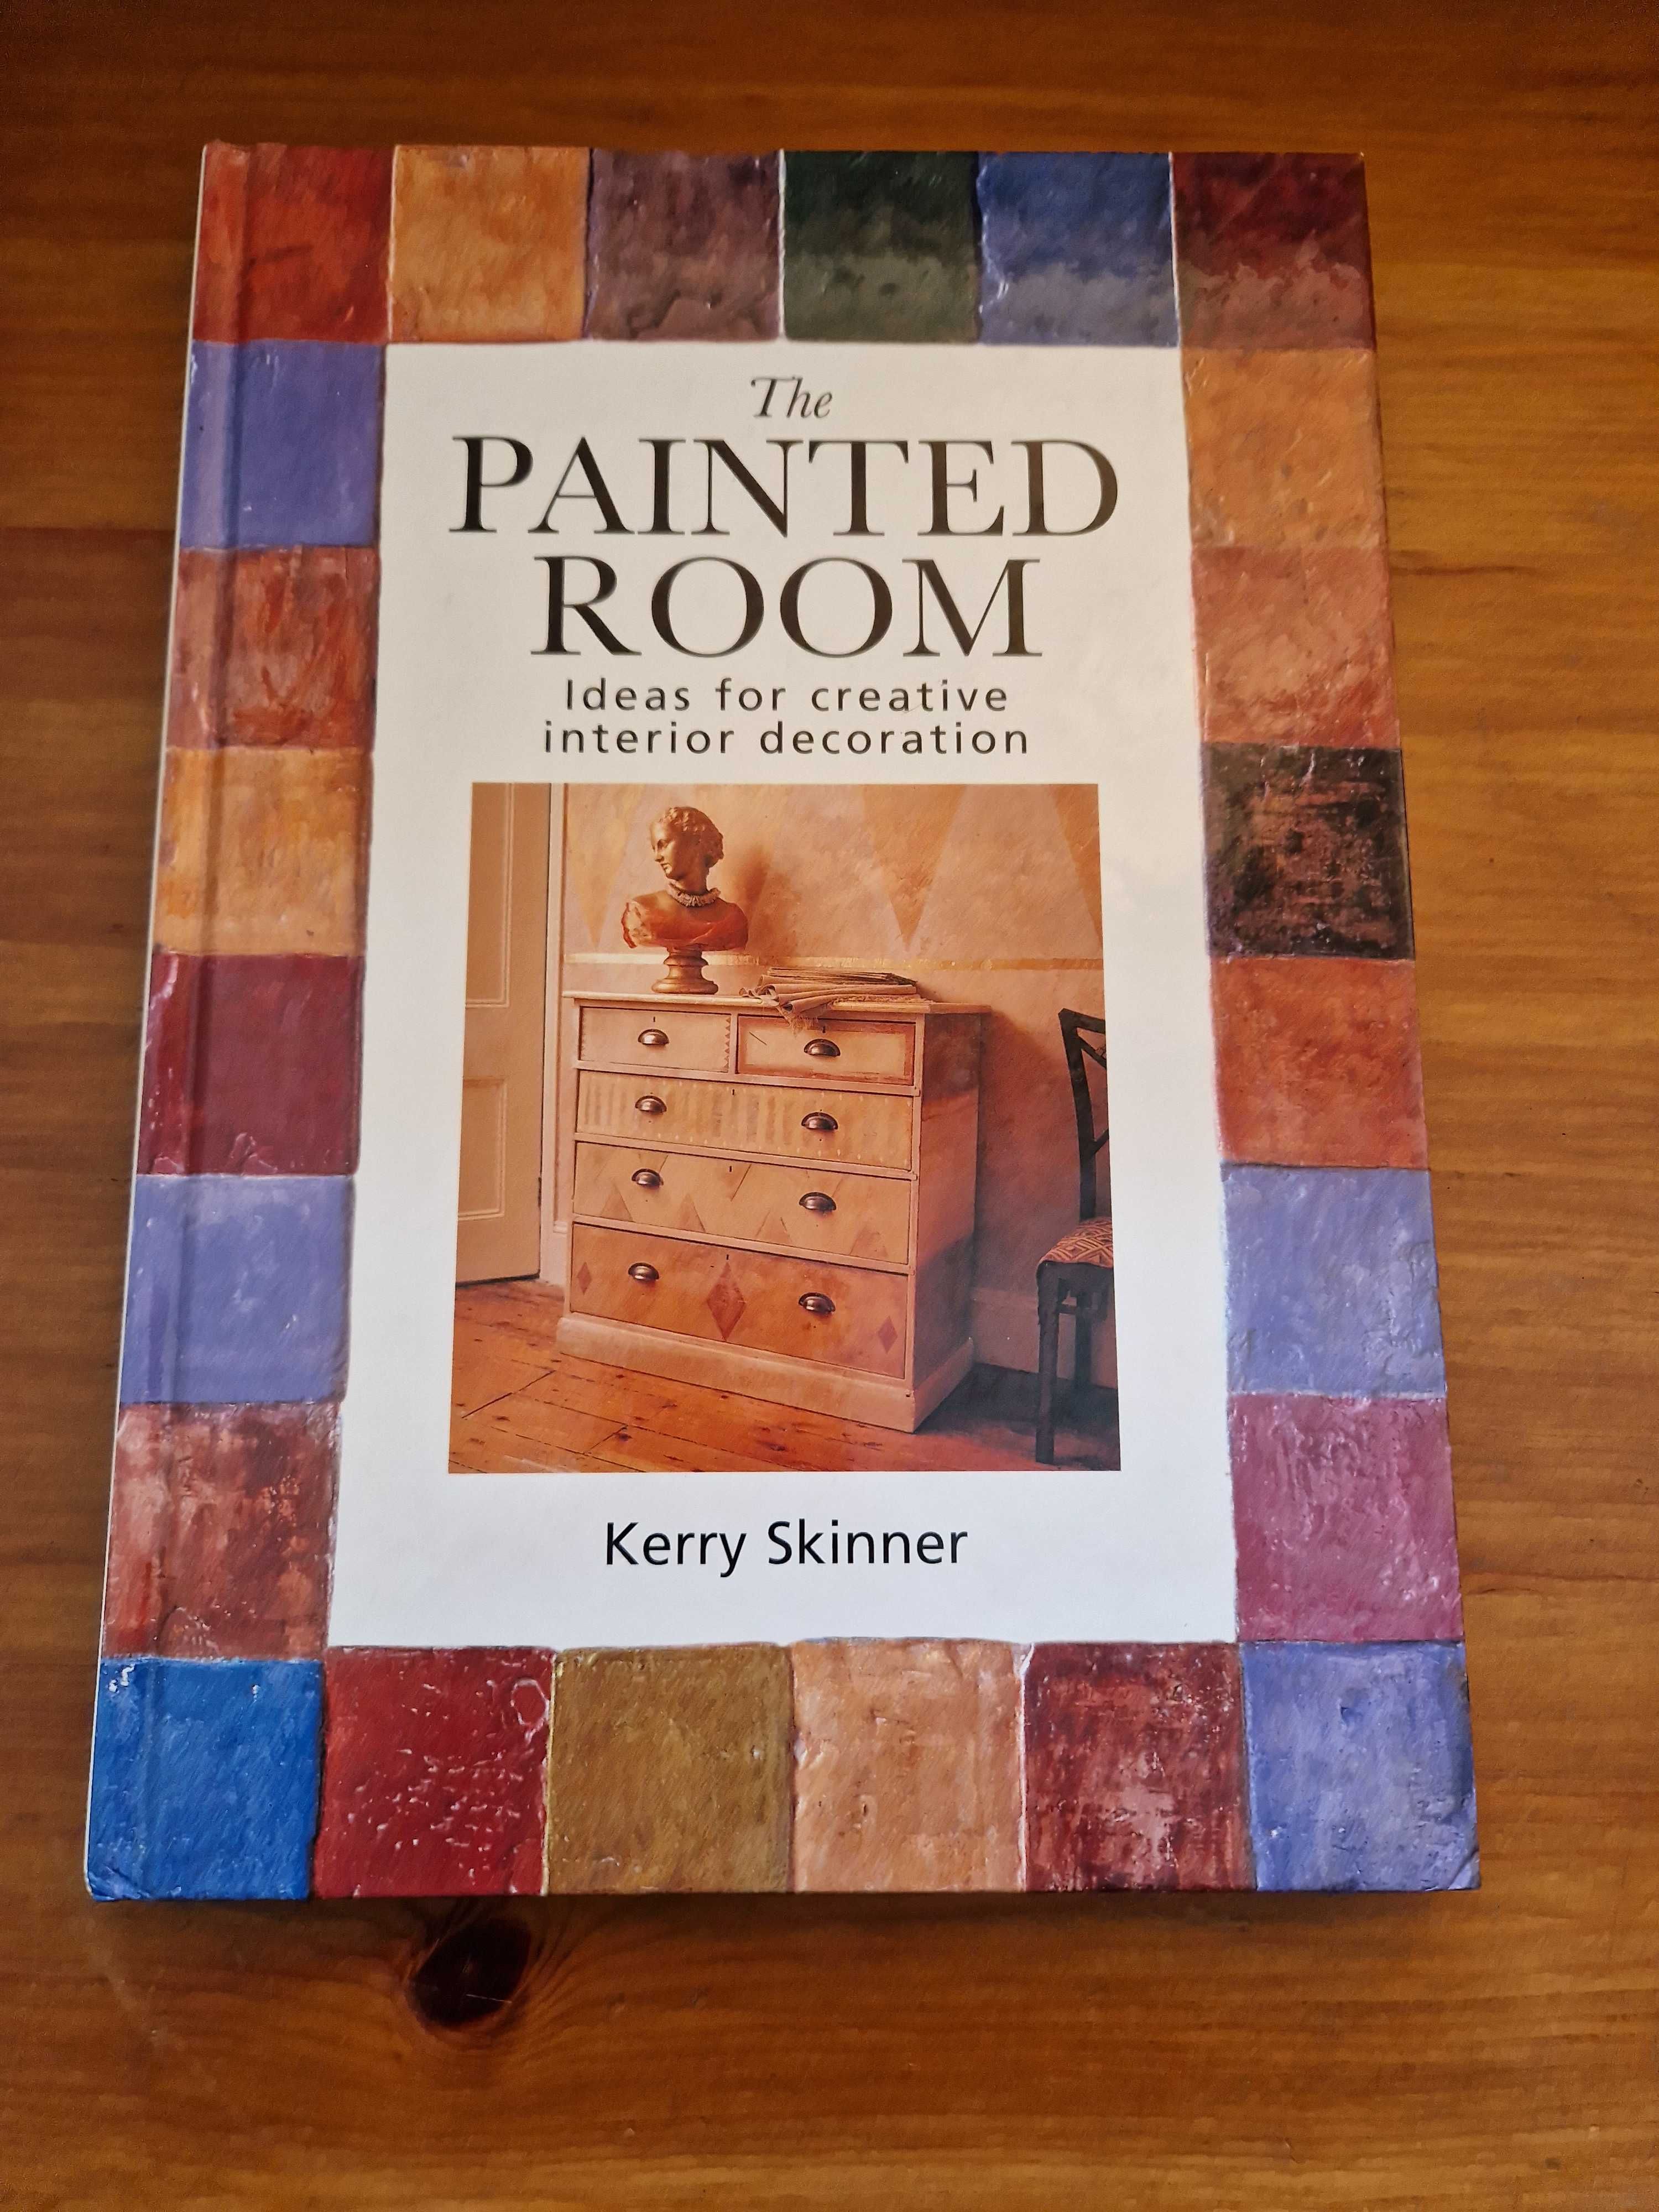 The Painted Room: Ideas for Creative Interior Decoration Kerry Skinner